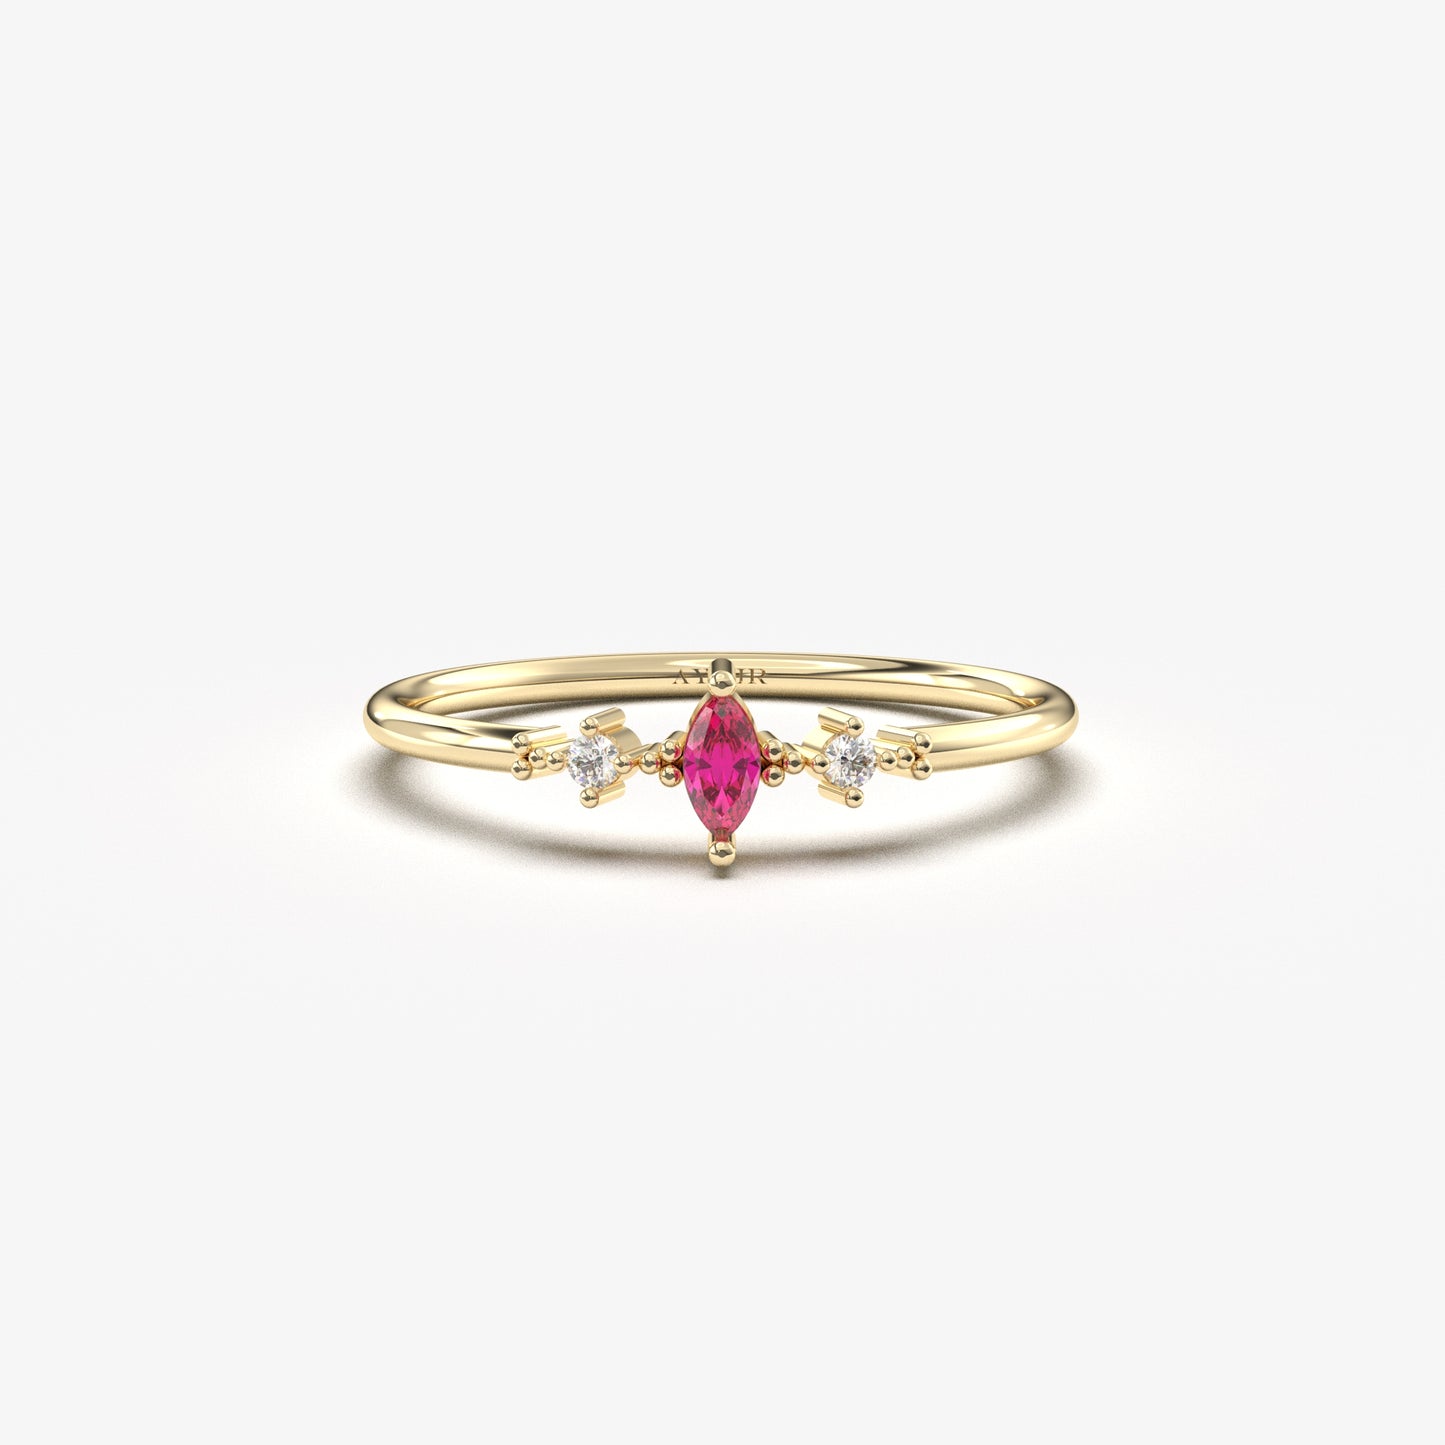 18K Gold Marquise Ruby Diamond Ring - 2S111R